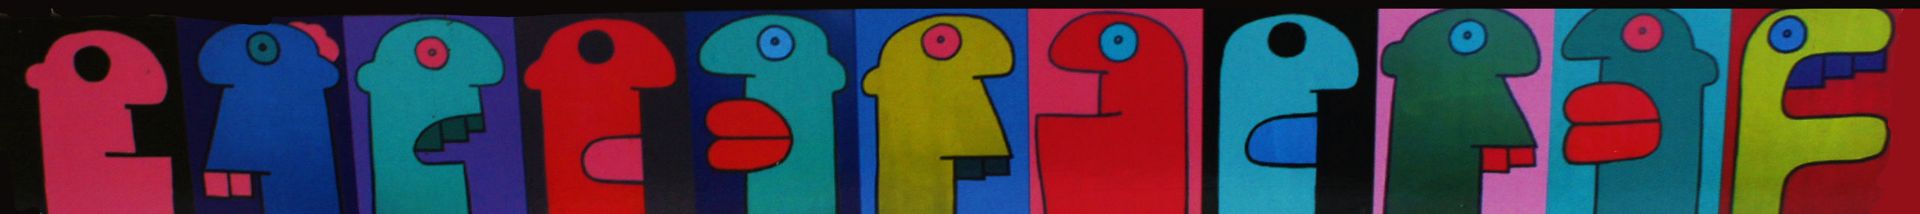 Thierry Noir (B.1958) Black ‘Heads’ Berlin Trabant Car In Colours By Thierry Noir, 1994, Sold Out - Image 7 of 21